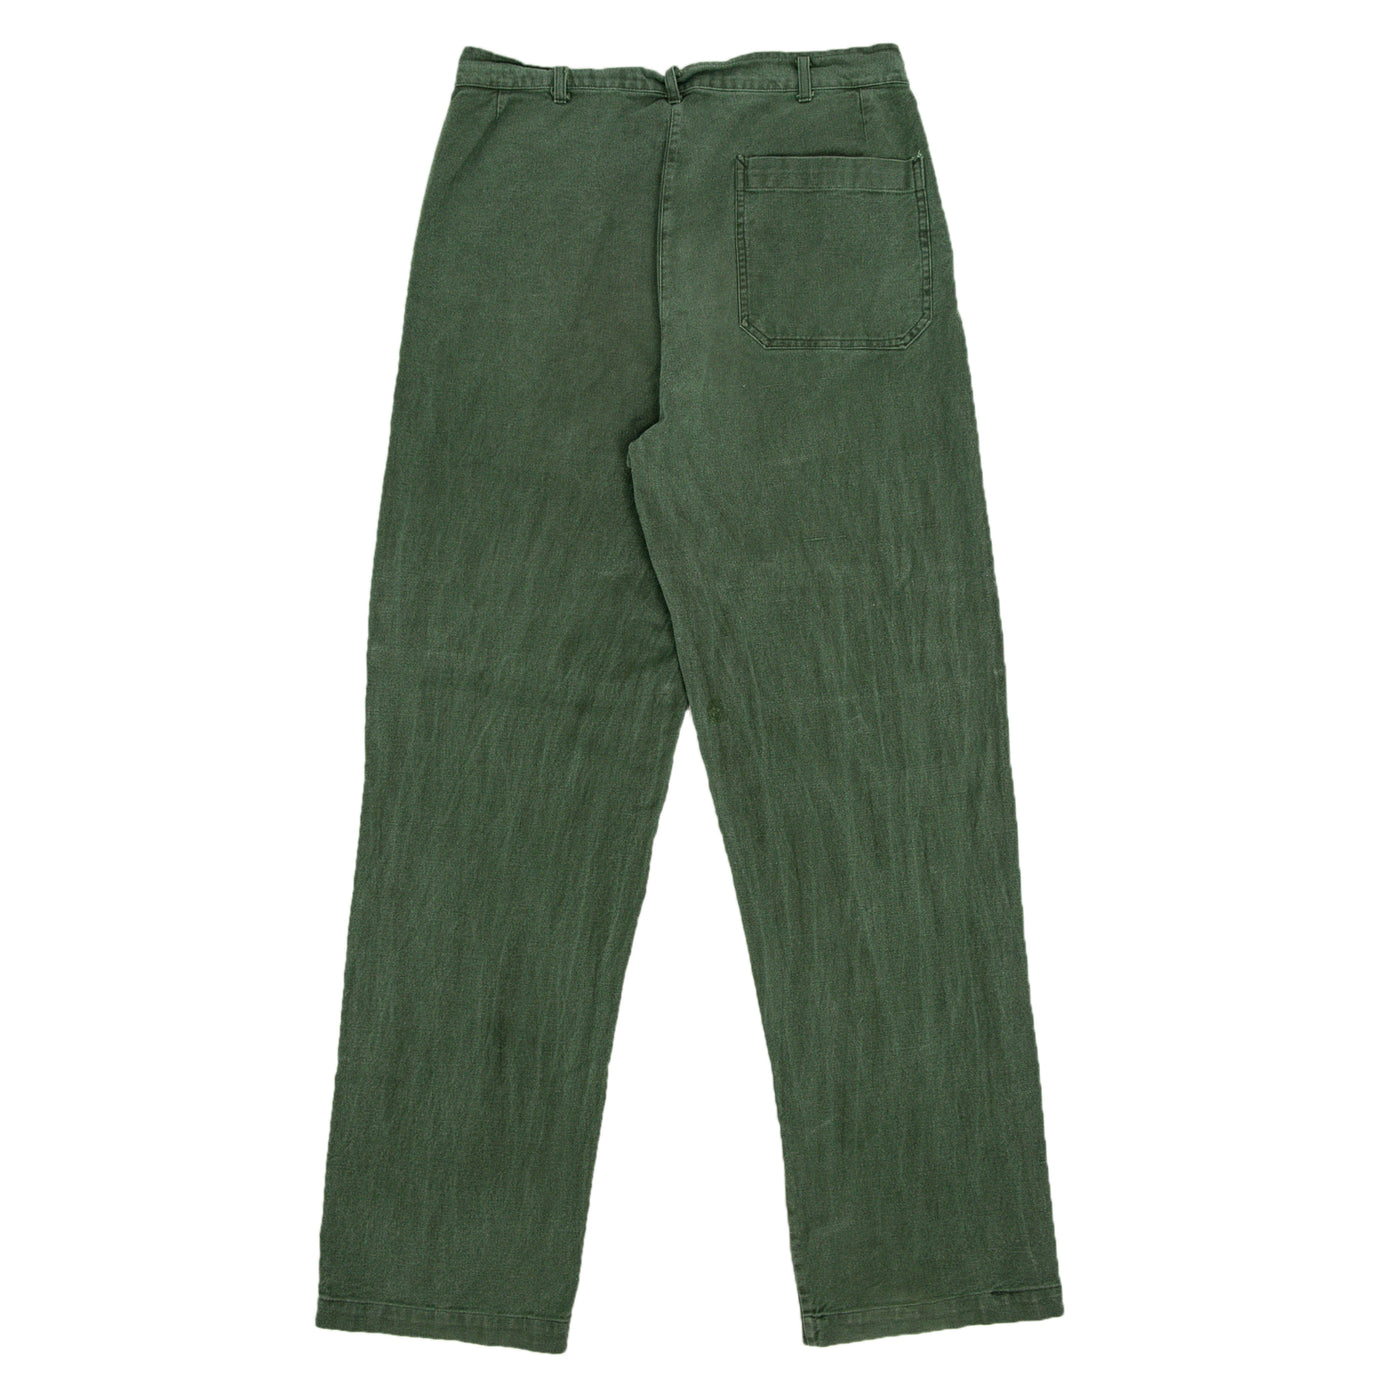 Vintage 70s Distressed Swedish Military Field Trousers Worker Style Green 30 W back